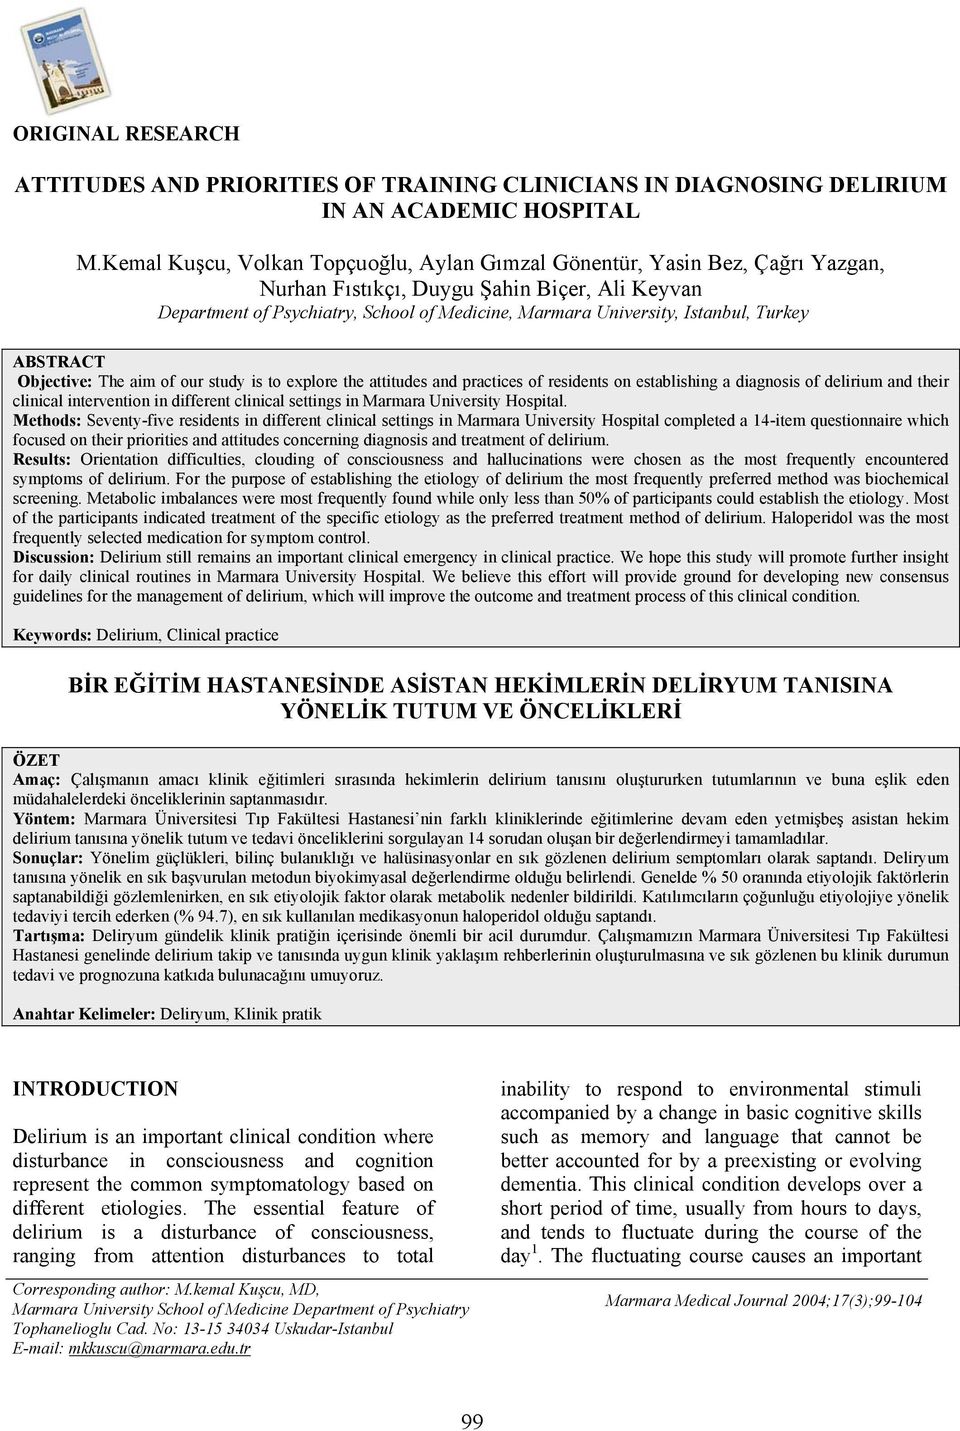 Istanbul, Turkey ABSTRACT Objective: The aim of our study is to explore the attitudes and practices of residents on establishing a diagnosis of delirium and their clinical intervention in different